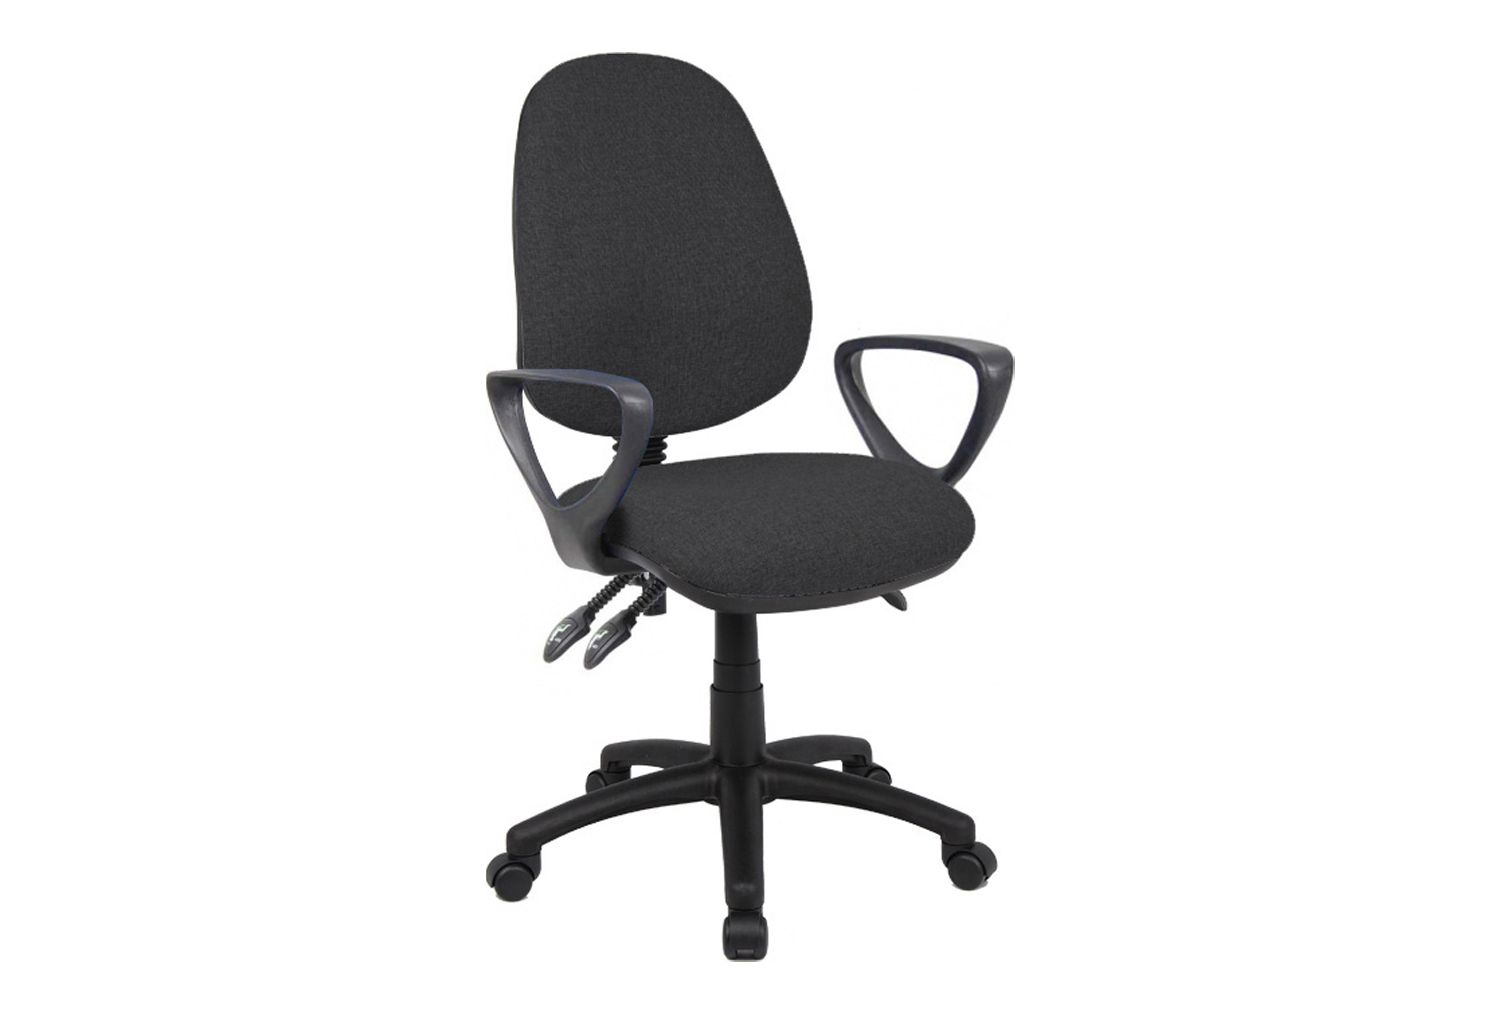 Full Lumbar 3 Lever Operator Office Chair With Fixed Arms, Charcoal, Express Delivery